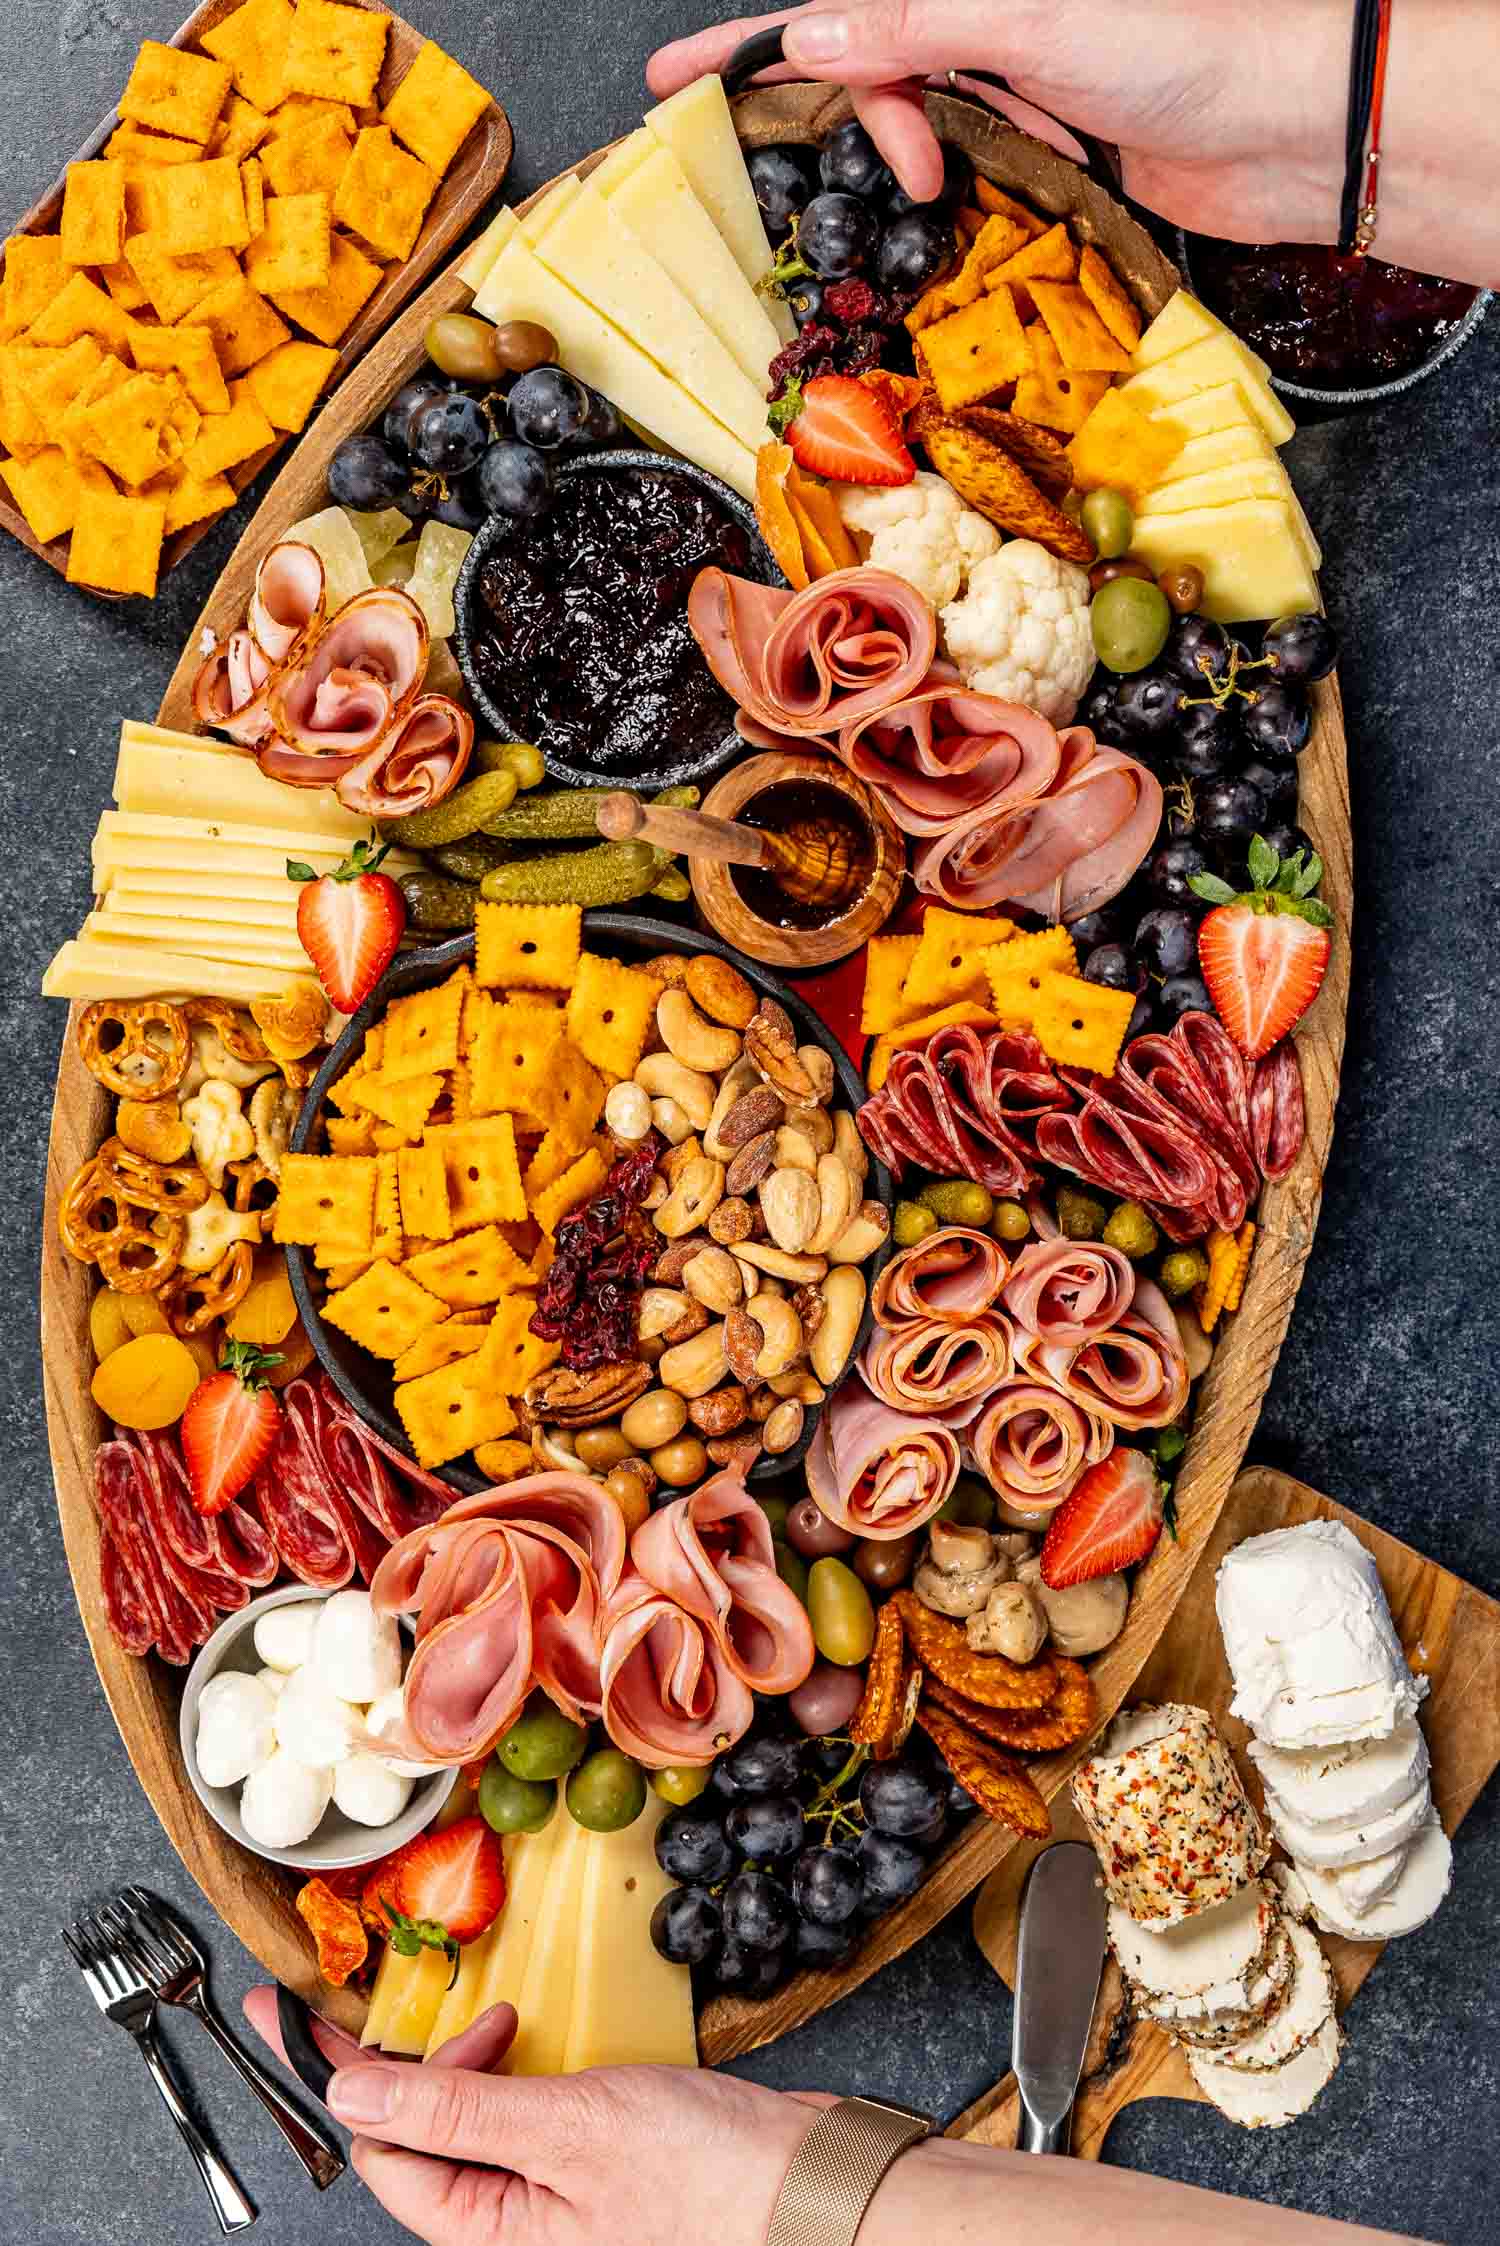 Charcuterie Board Ideas and Tips From an Expert